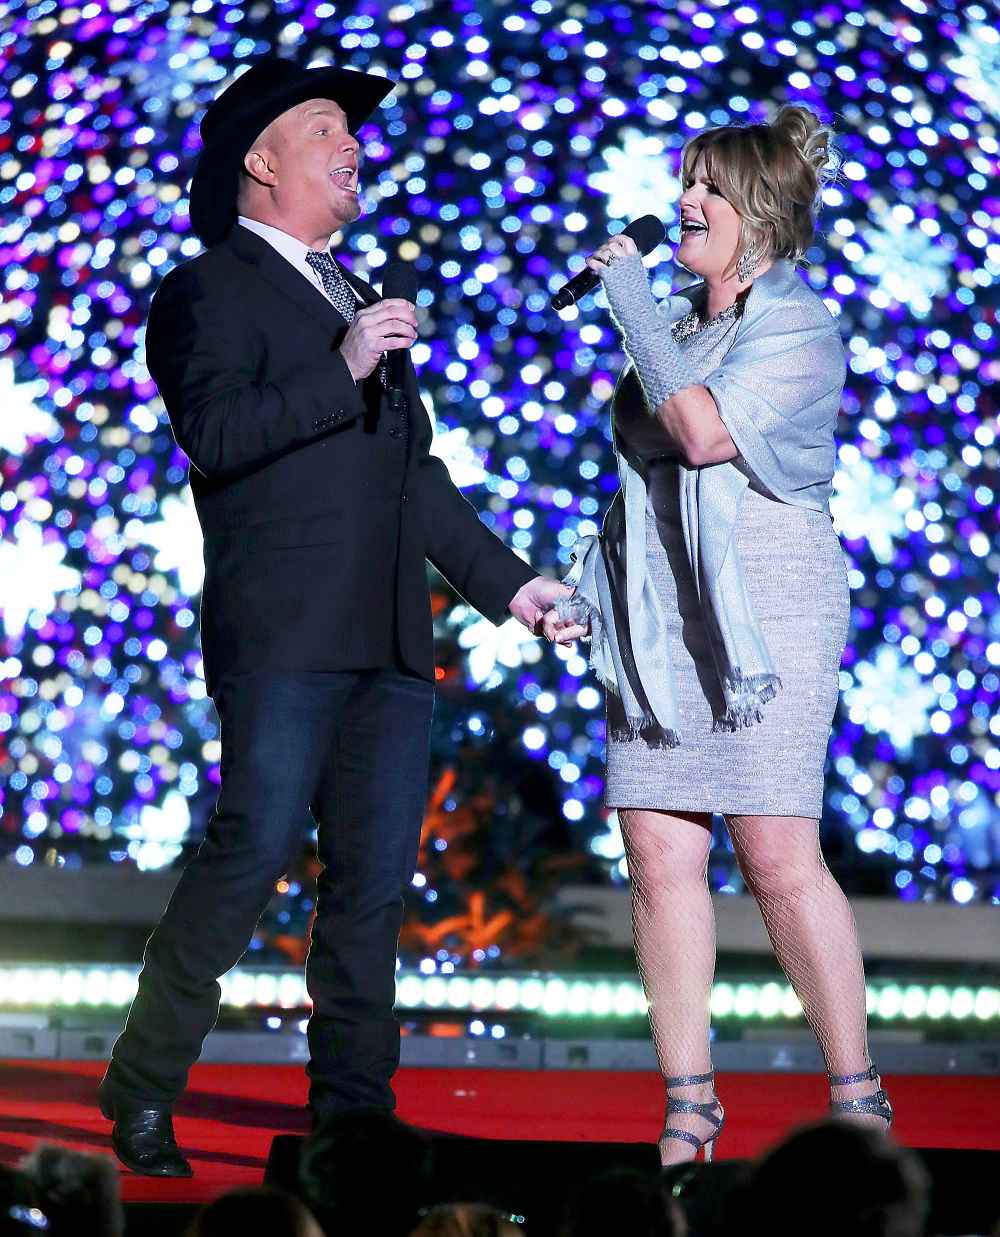 Garth Brooks and Trisha Yearwood perform during the the 94th annual National Christmas Tree Lighting Ceremony in Washington, DC.